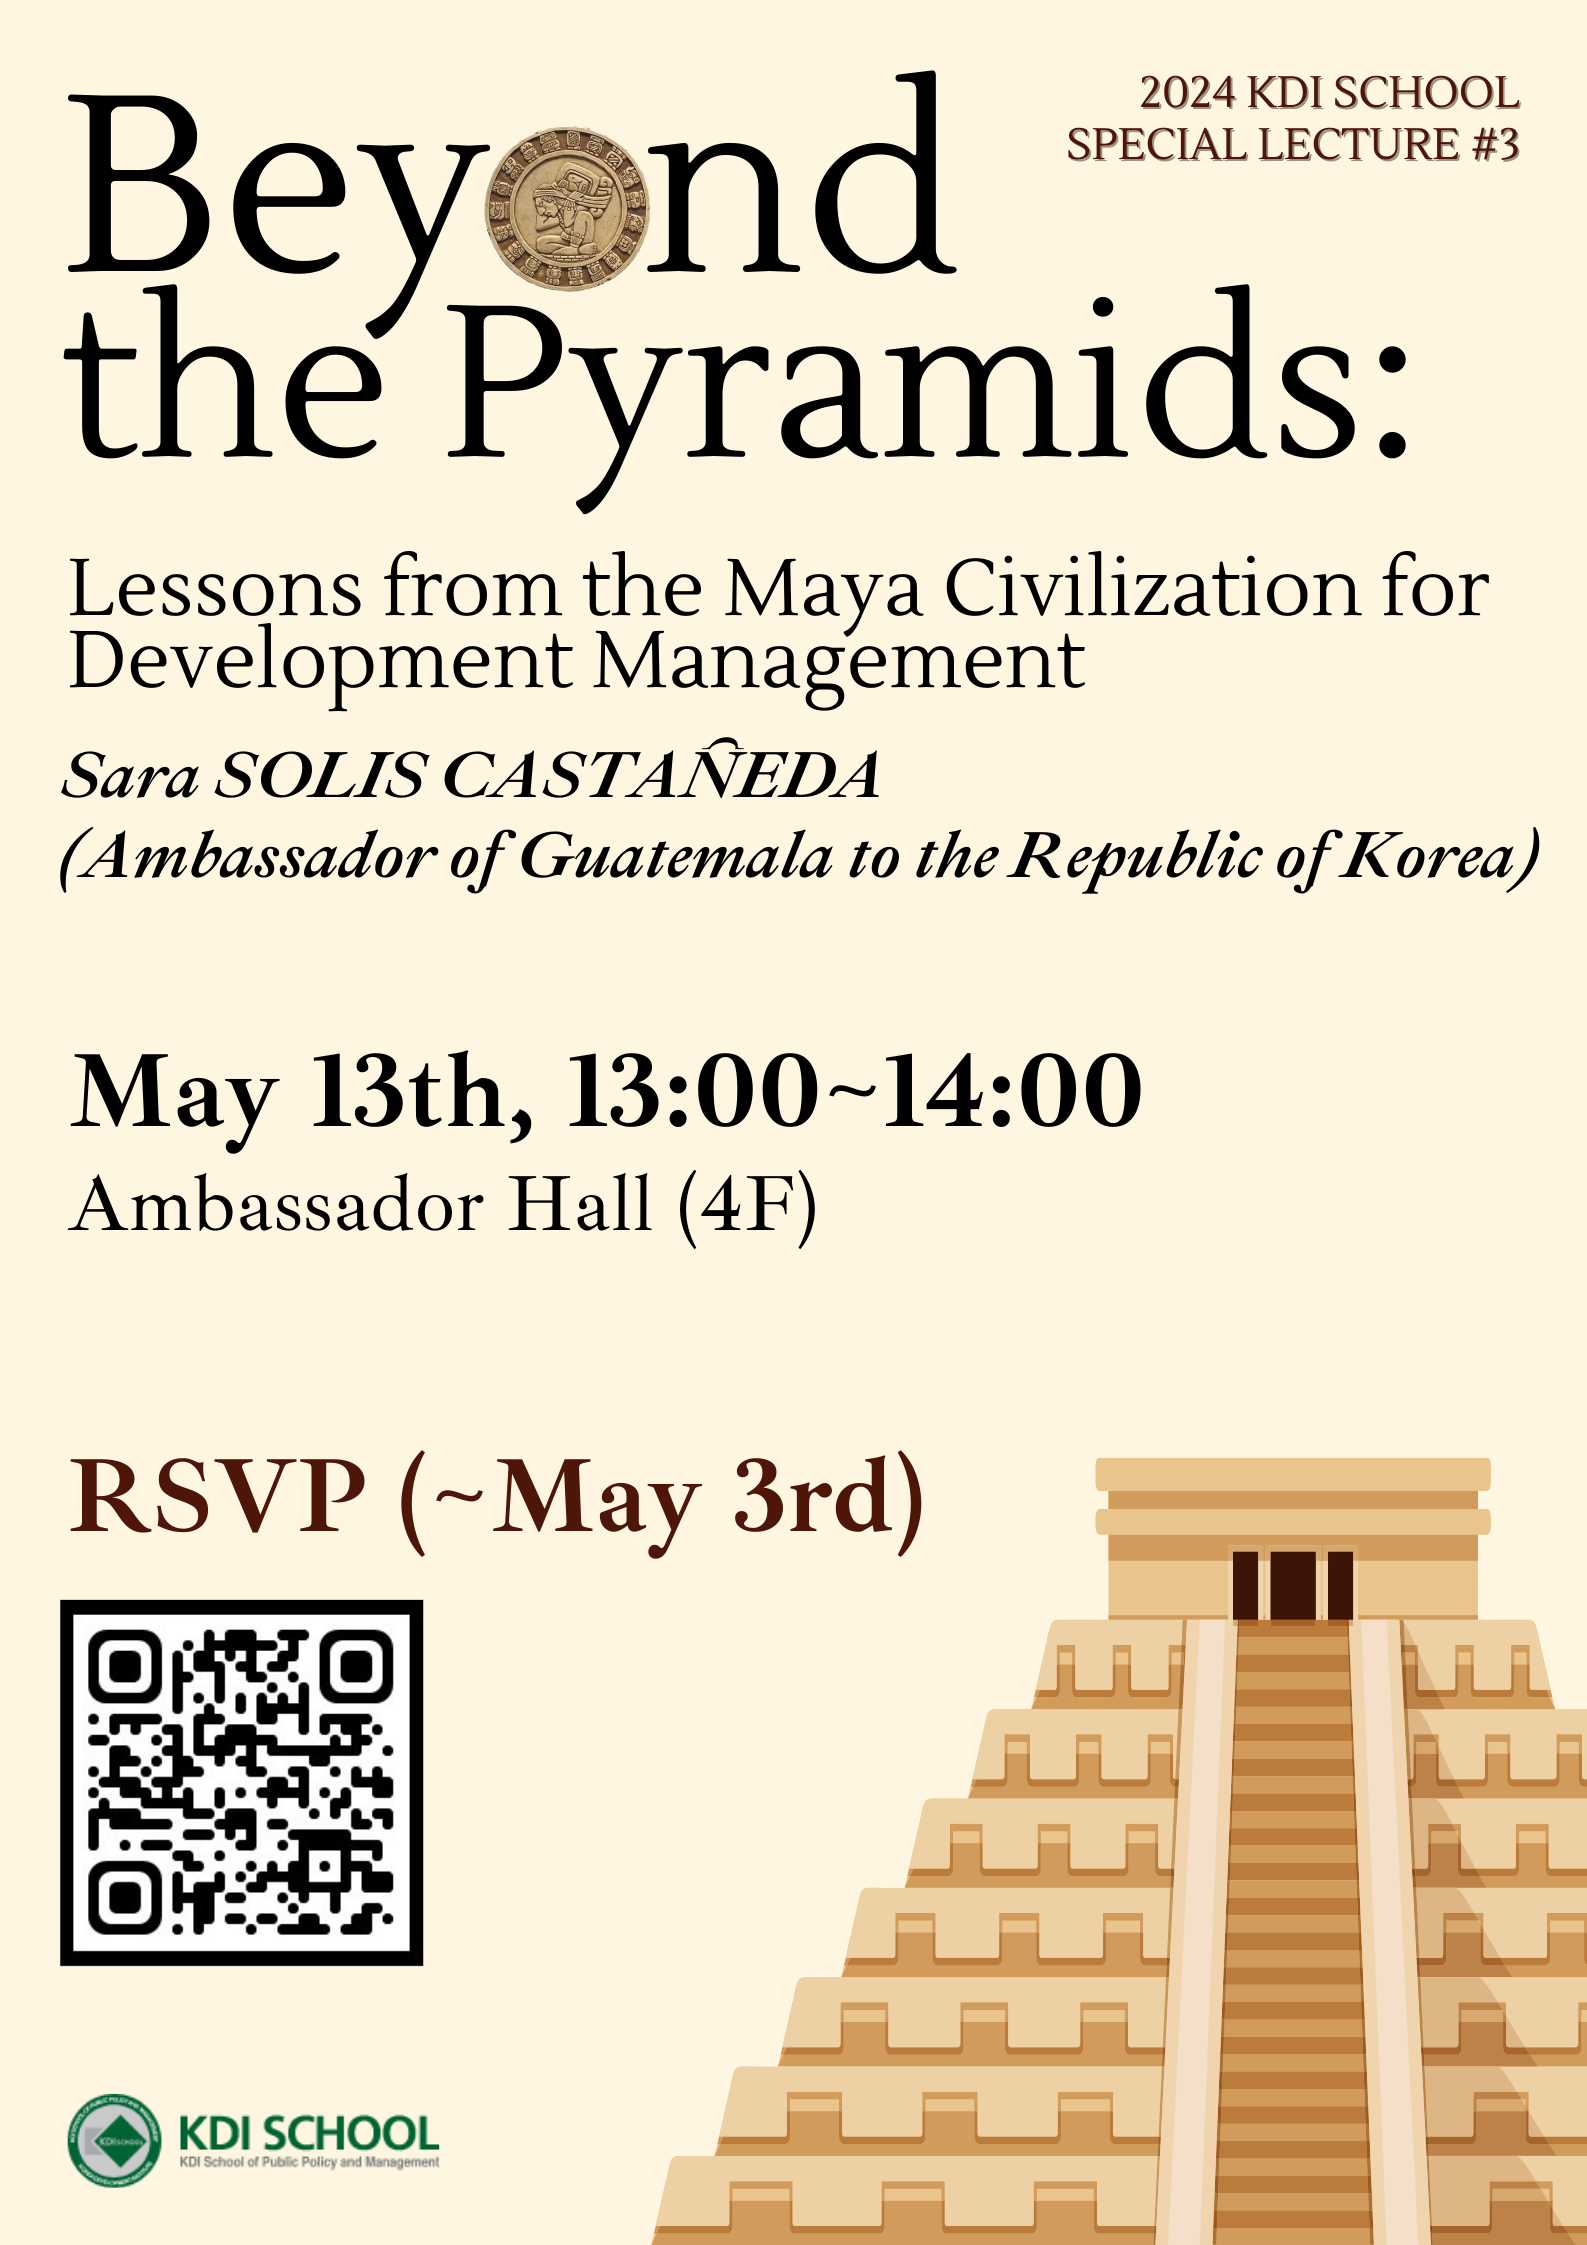 2024 KDIS Special Lecture #3 (May 13th) 이미지